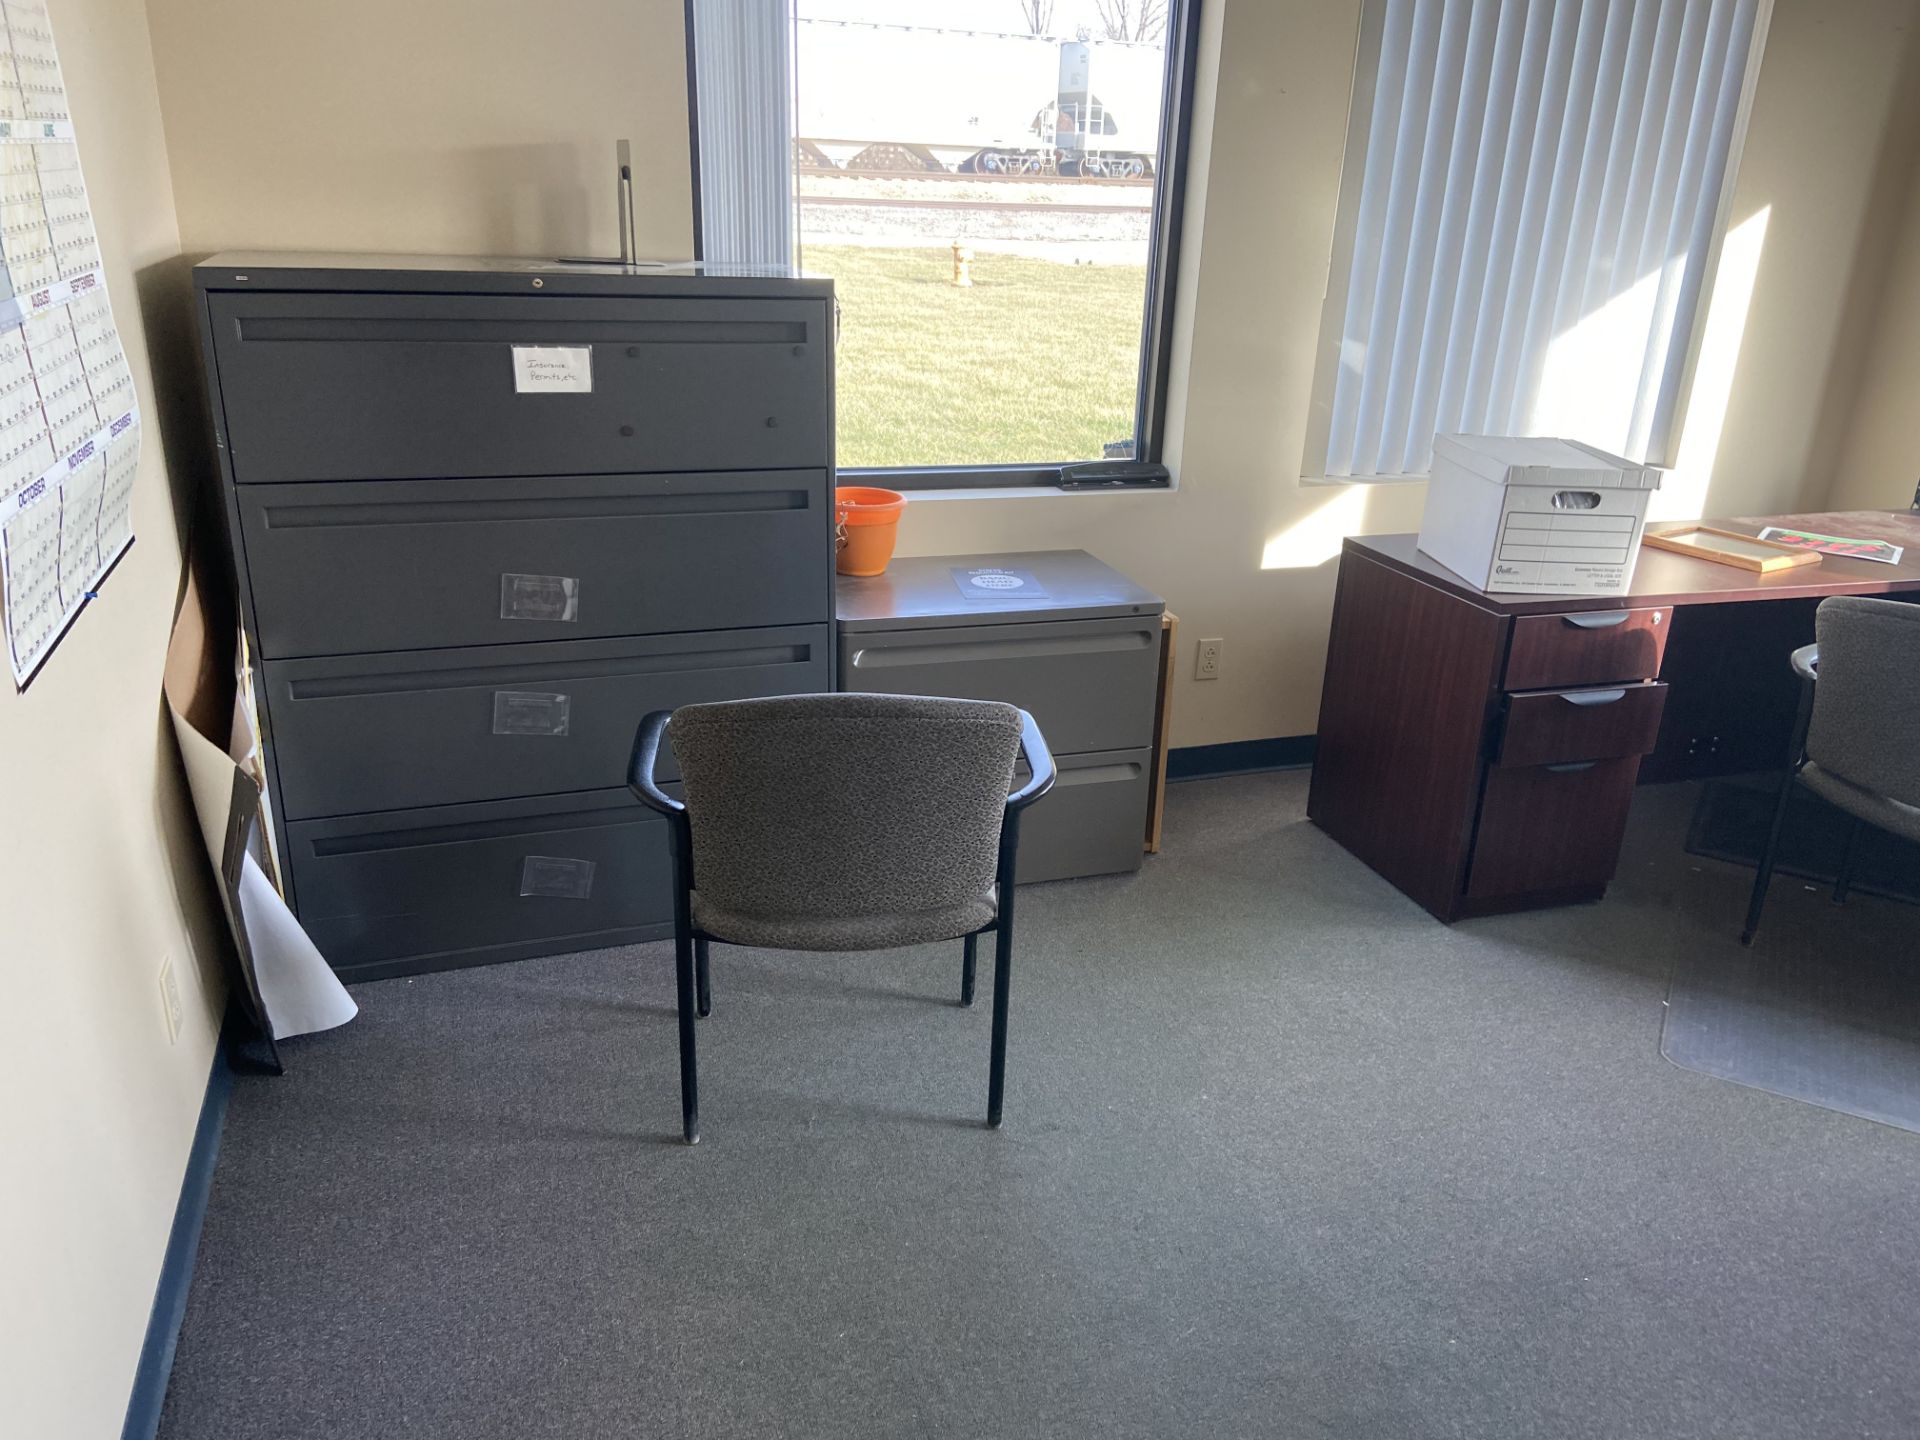 All Office Furniture (All Pictured, Buyer Has Right to Abandon Any Unwanted Items) - Image 5 of 26